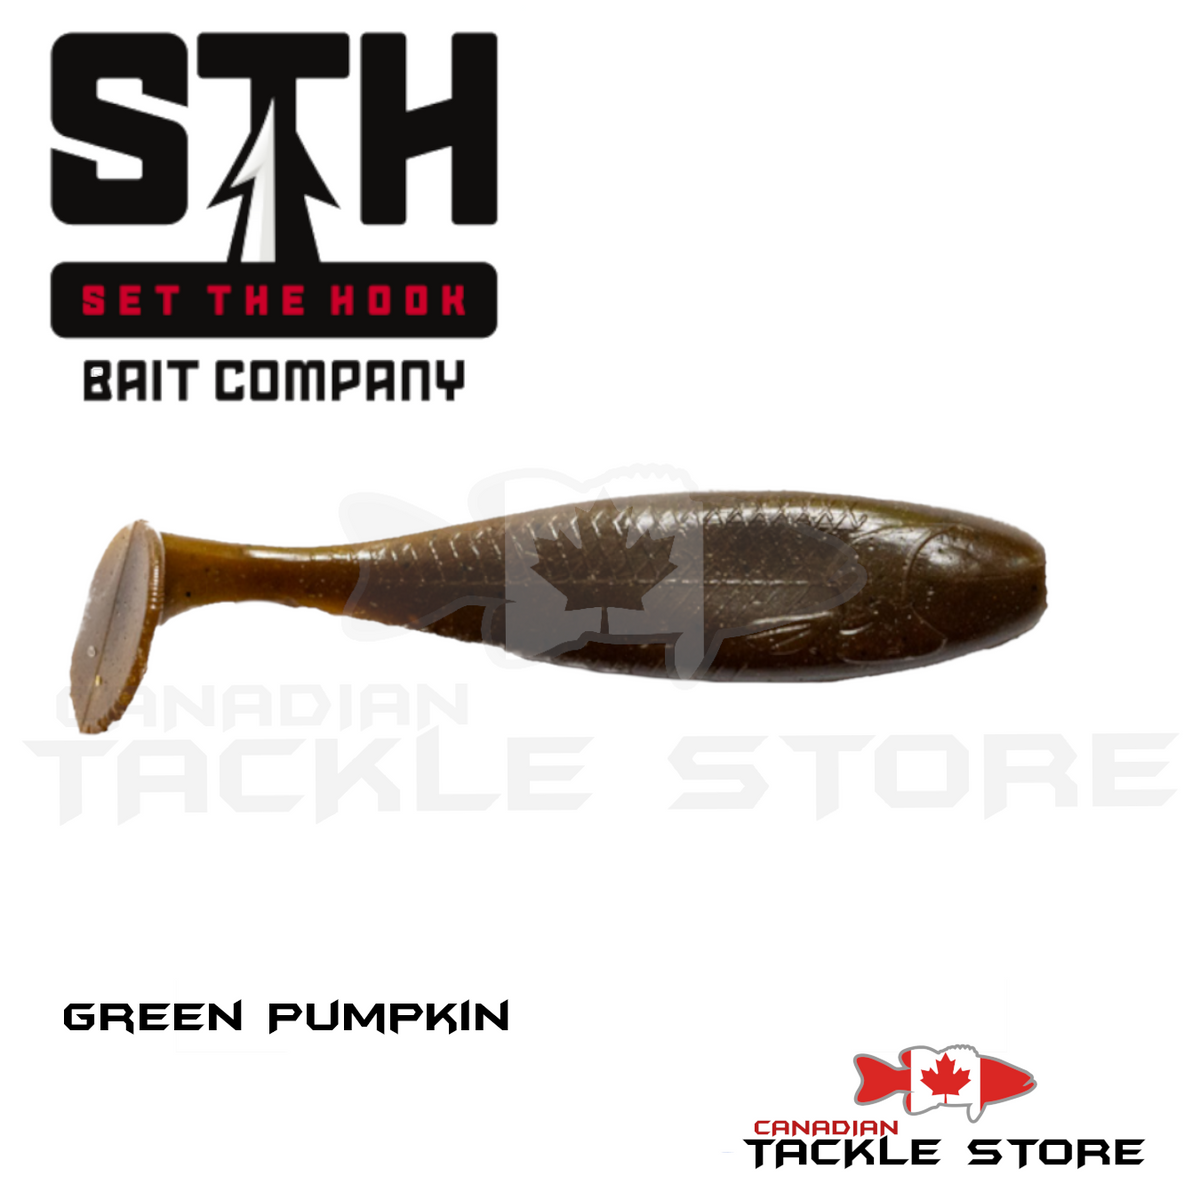 Bait Fuel – The Hook Up Tackle